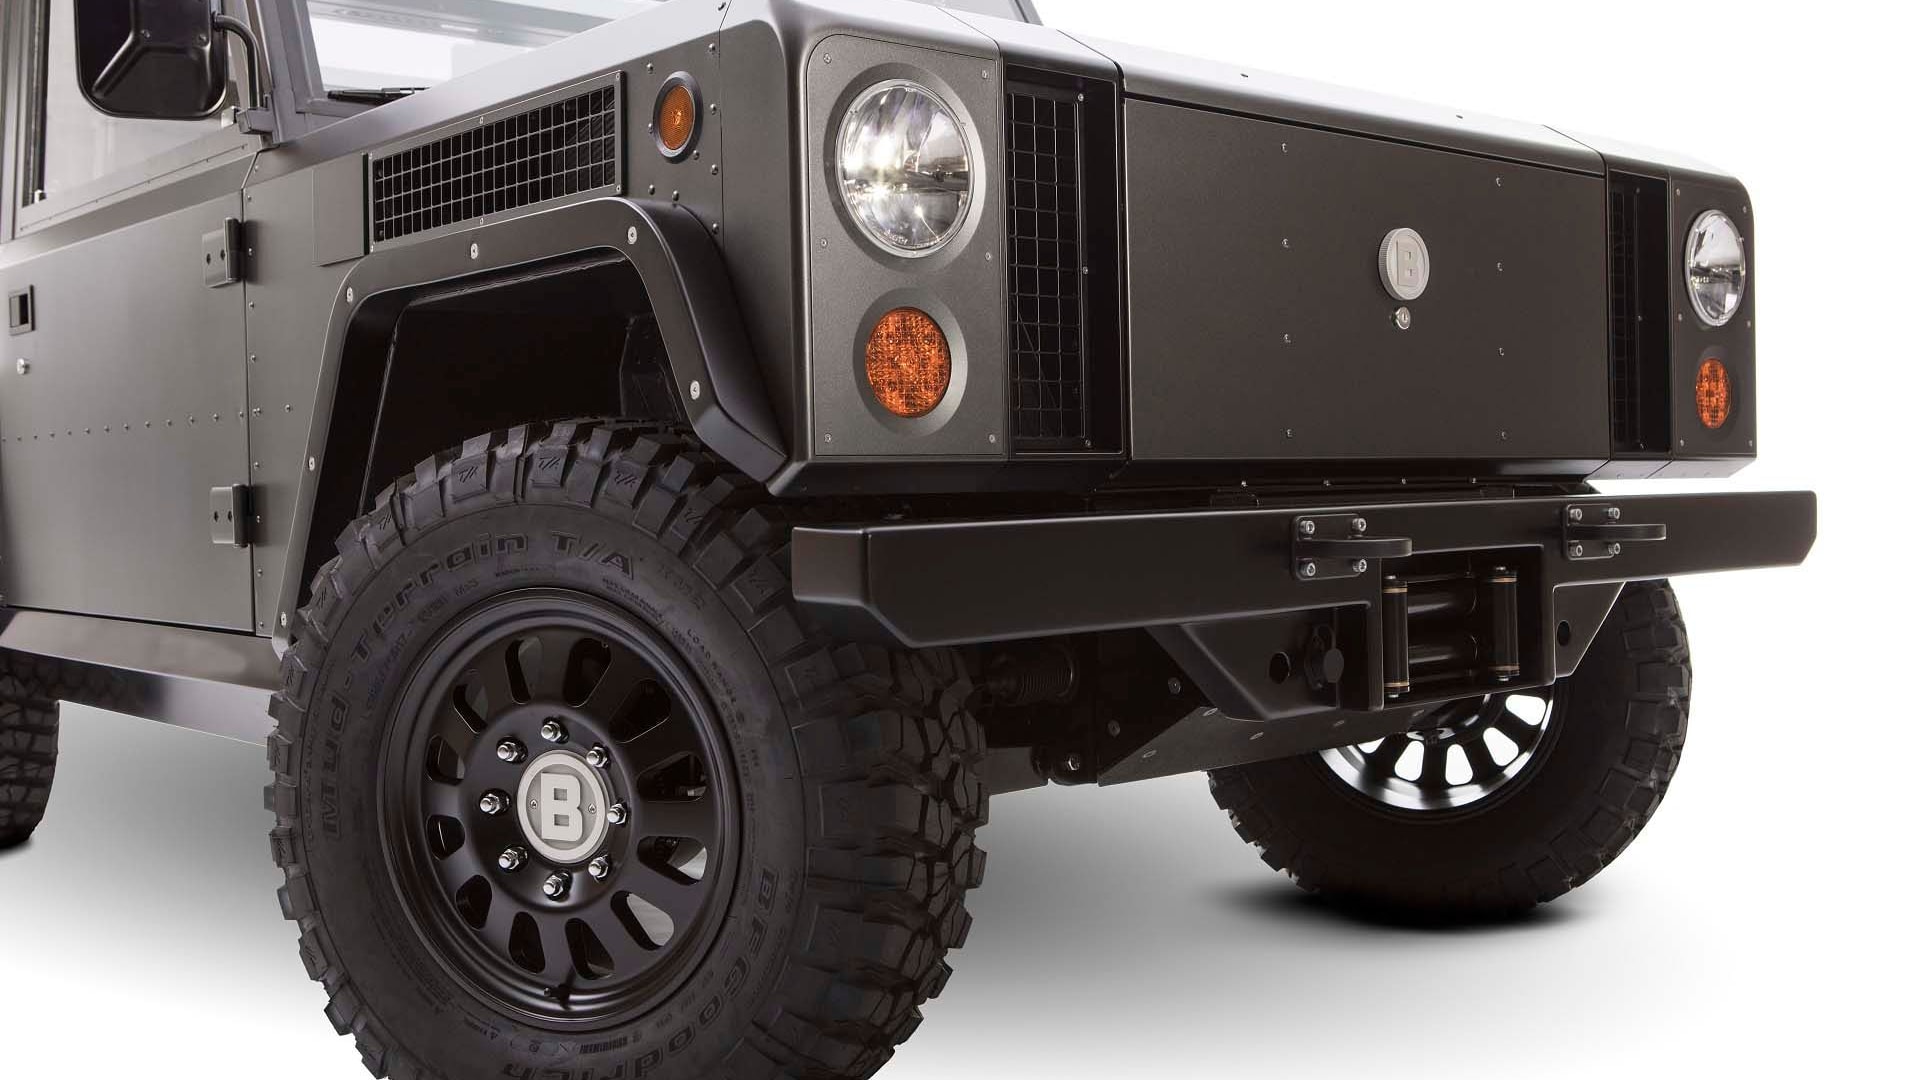 Bollinger B1 the coolest electric car you’ve never heard of